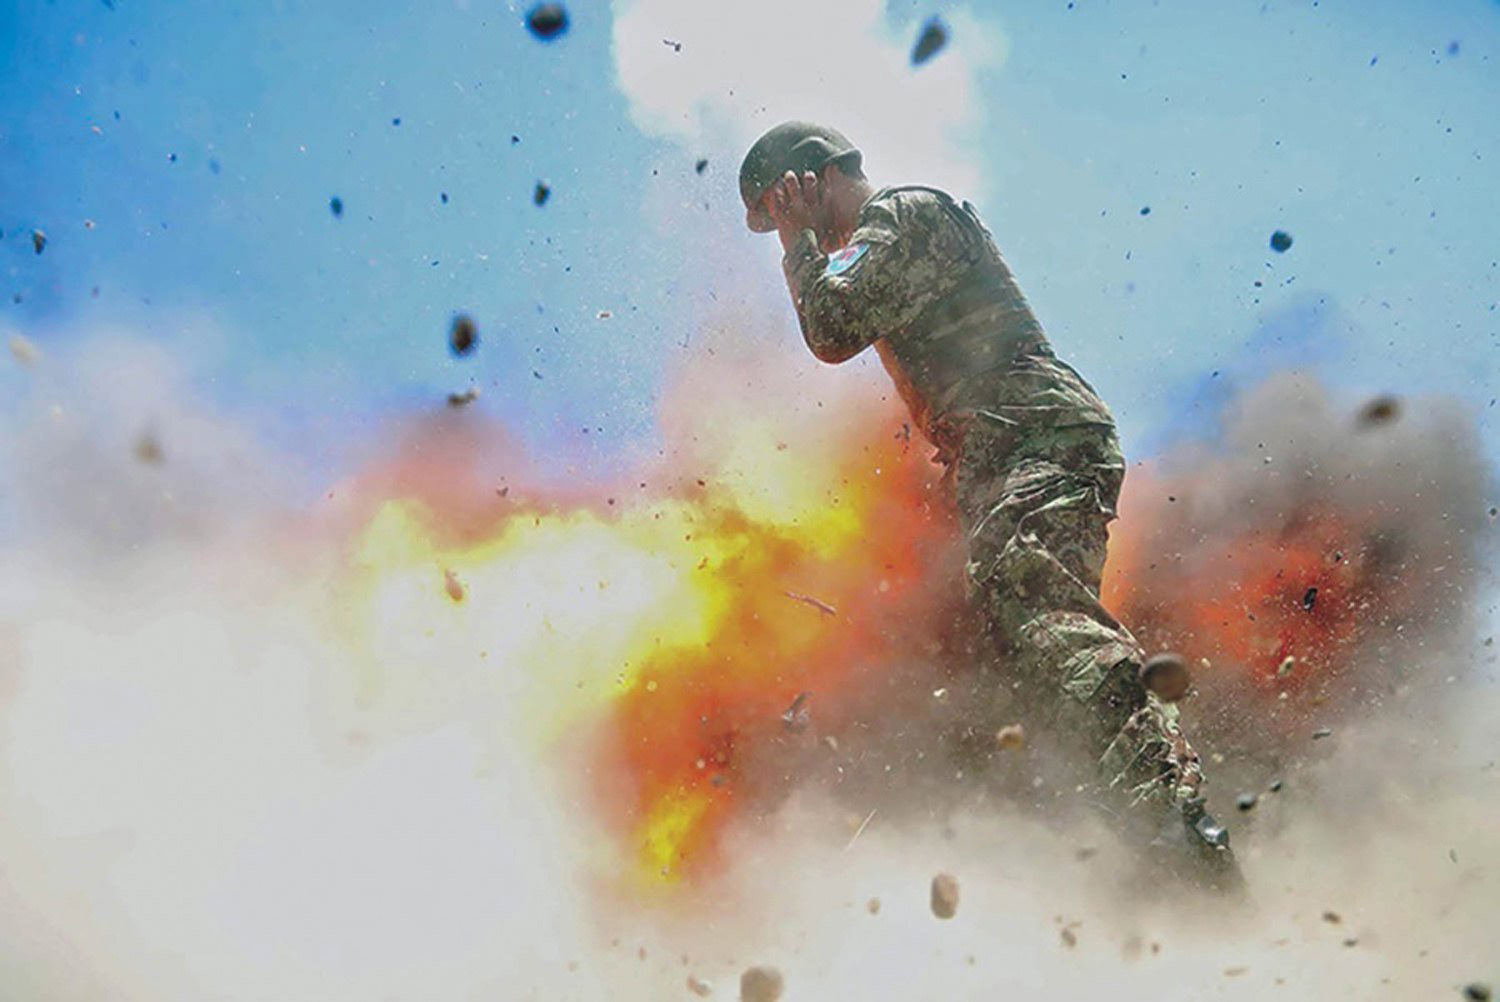 A mortar tube accidentally explodes during an Afghan National Army live-fire training exercise in Laghman Province, Afghanistan, on July 2, 2013. (Spc. Hilda Clayton—U.S. Army/EPA)